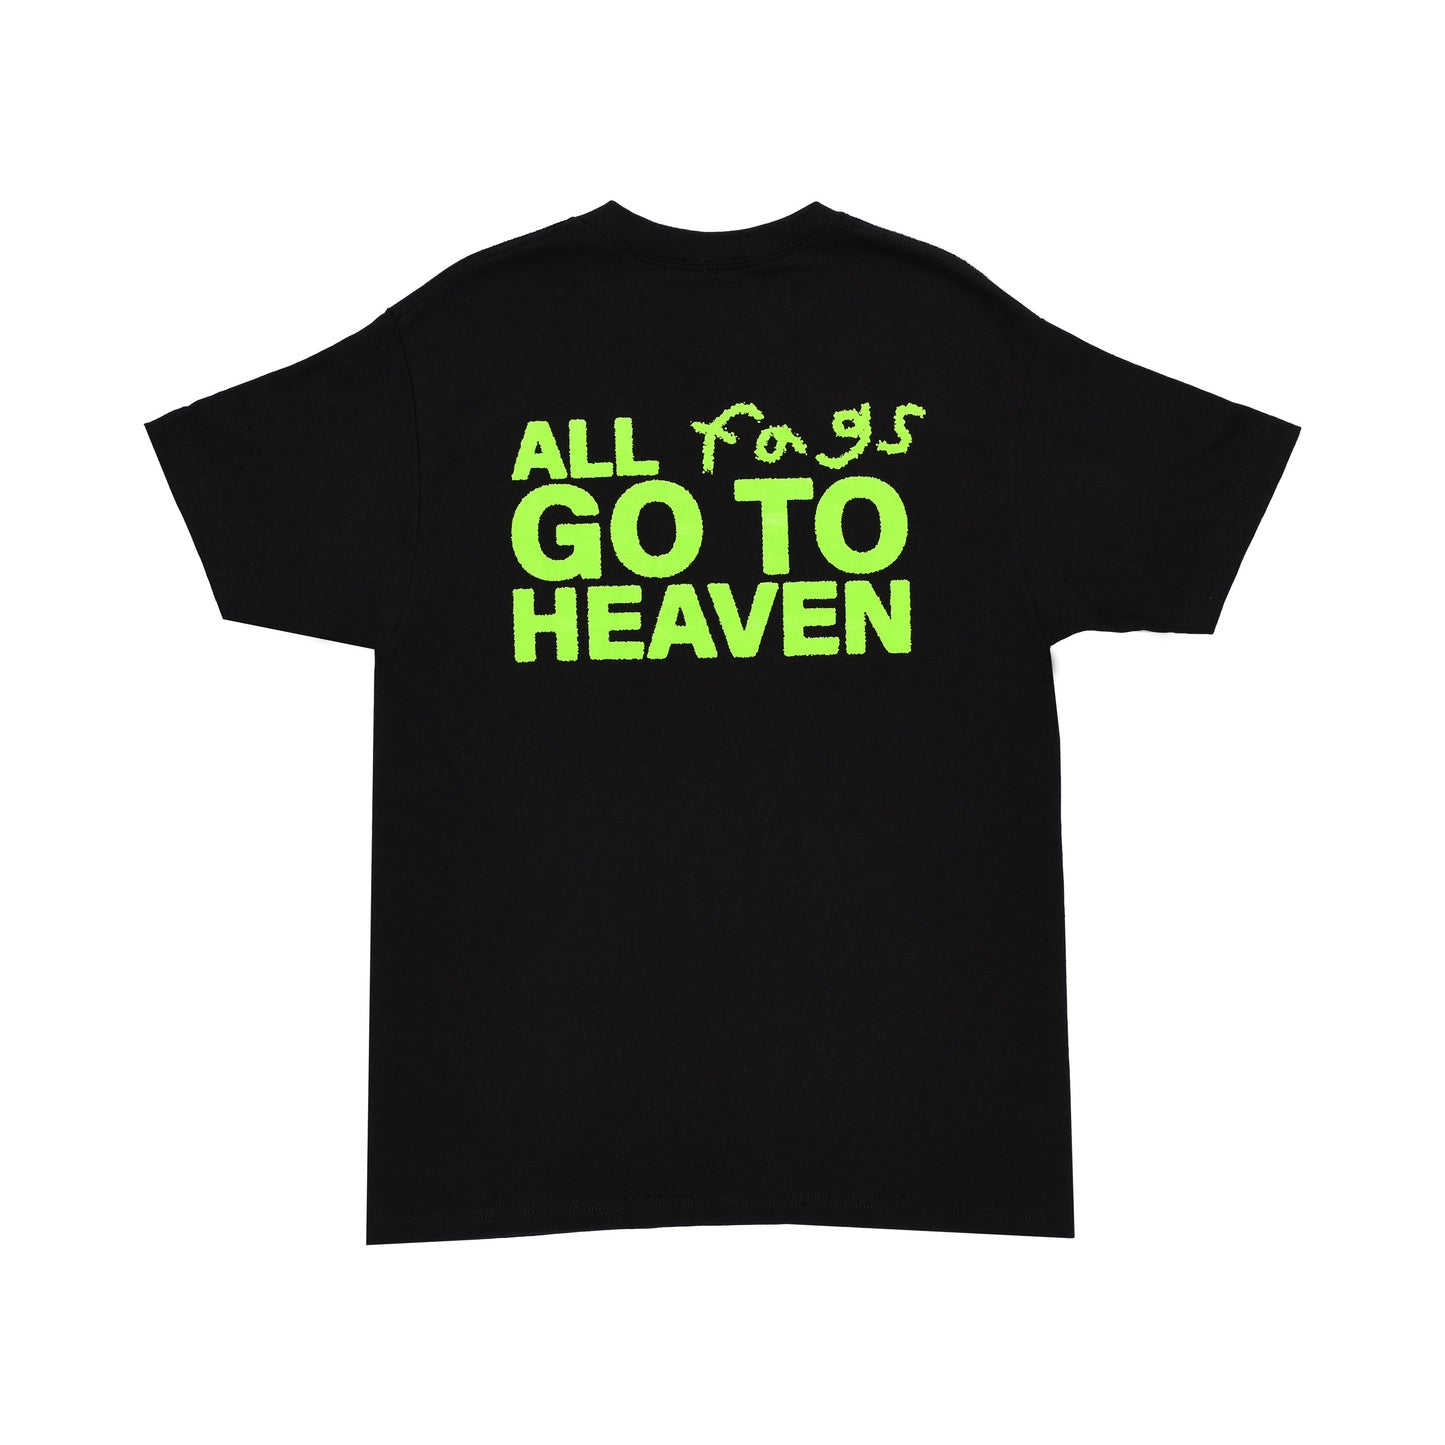 All Fags Go To Heaven Tee, Black